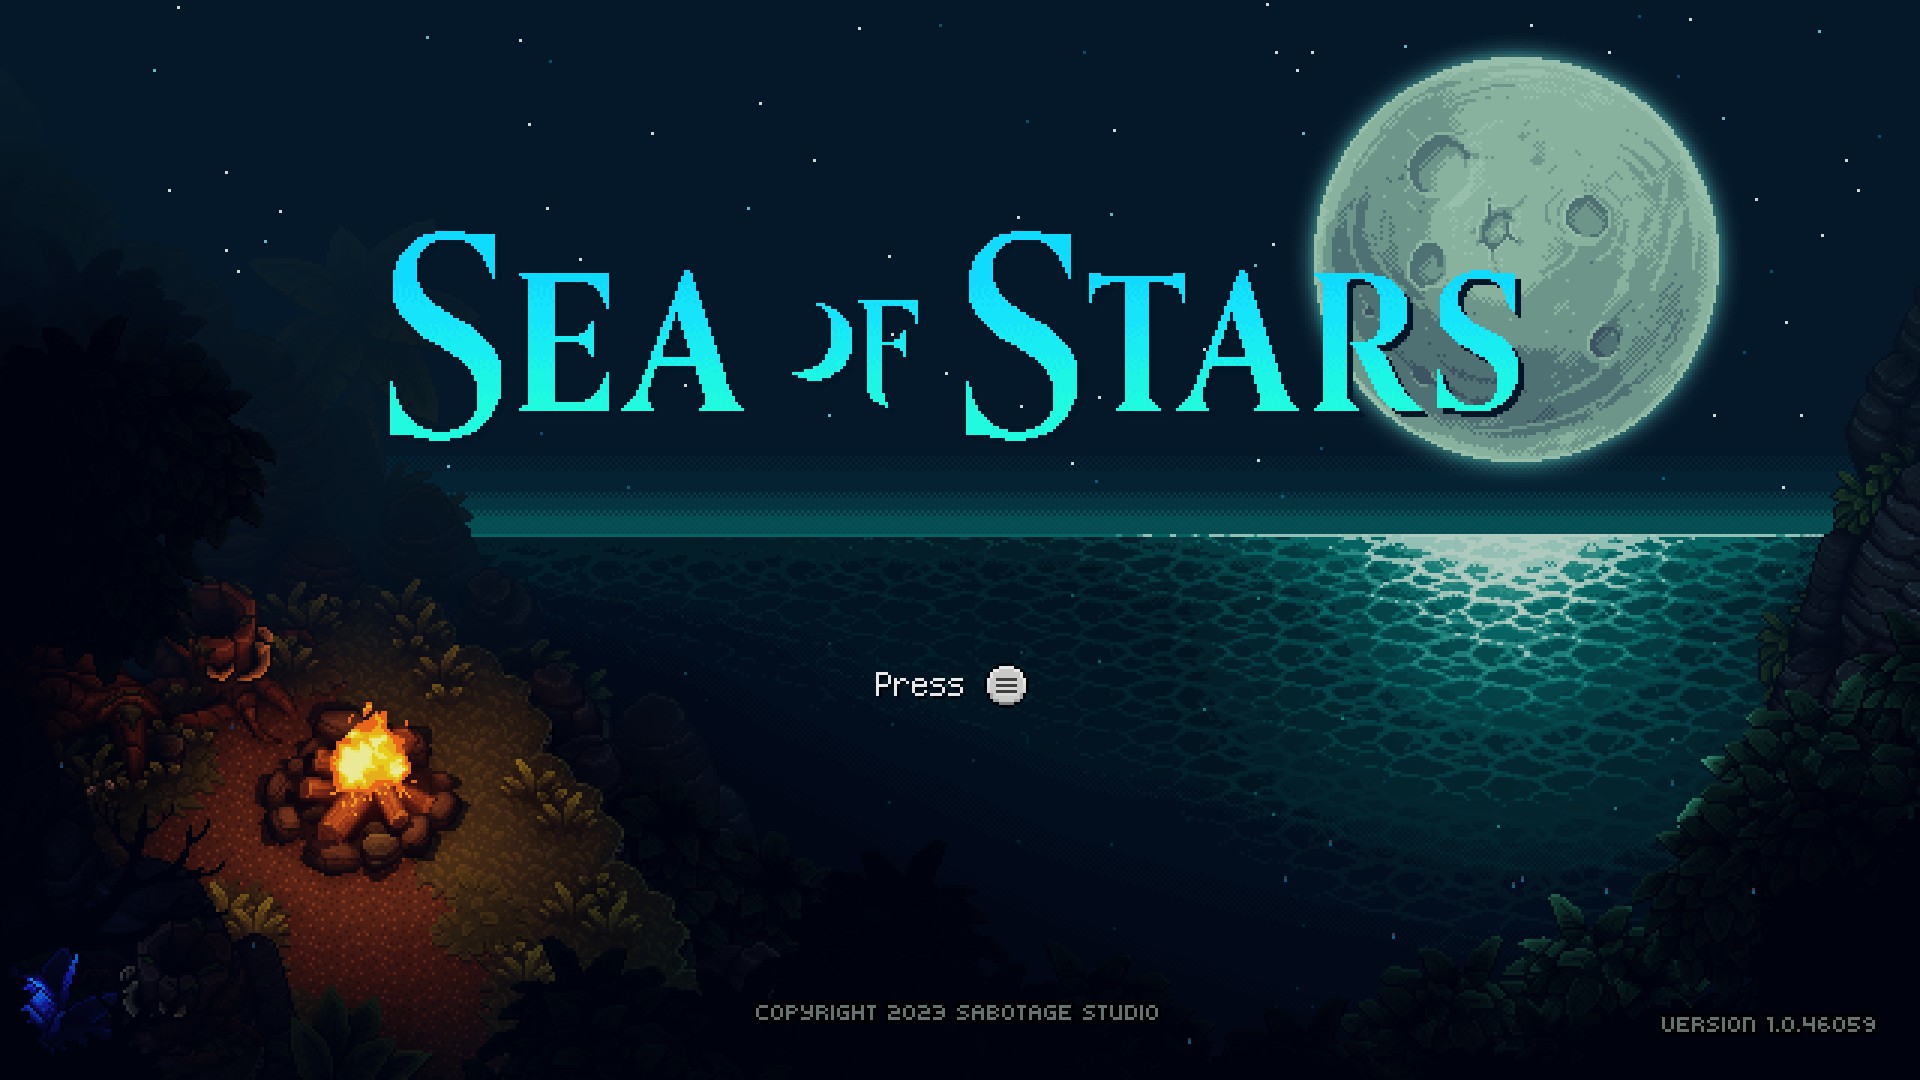 Sea of Stars Release Date Delayed to 2023, Demo Planned for 2022